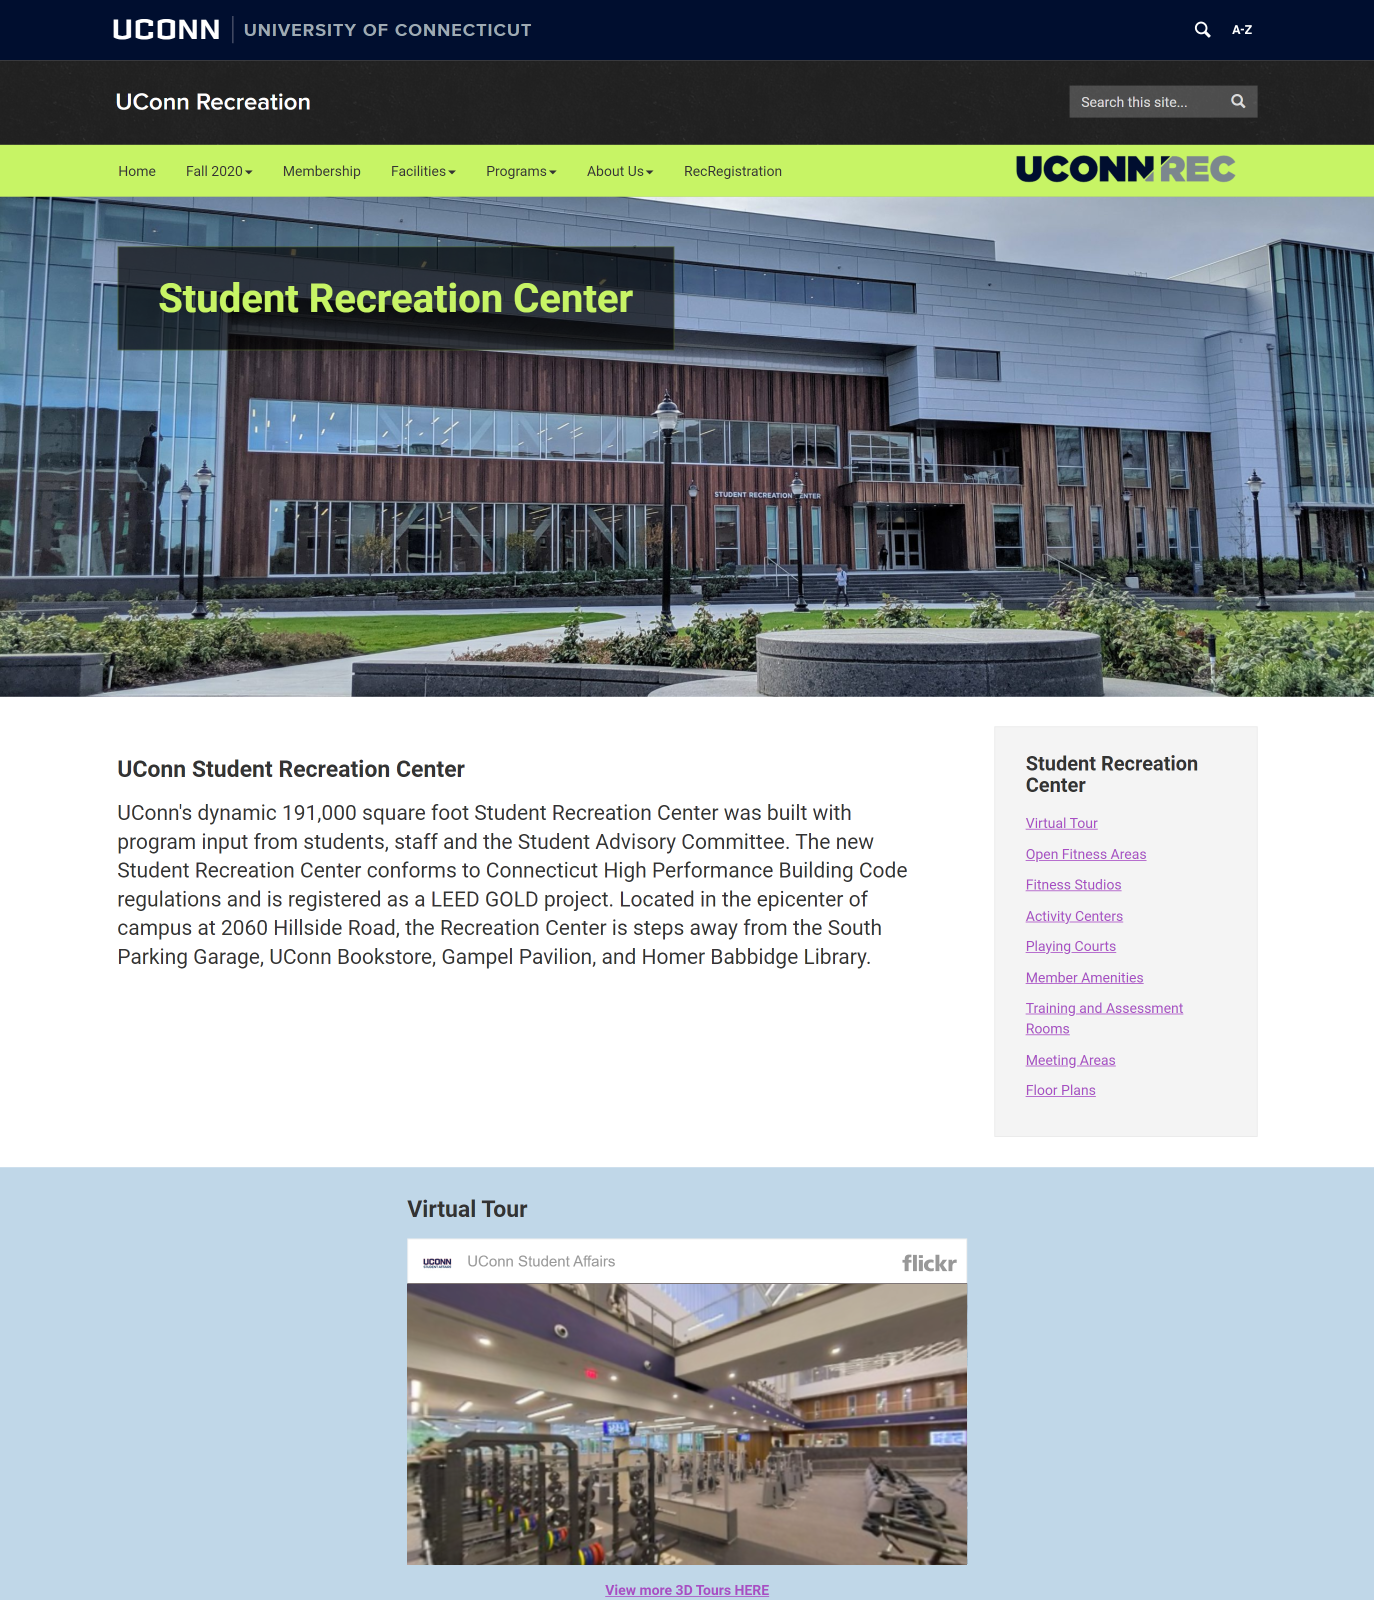 Screenshot of an interior page of the Recreation website